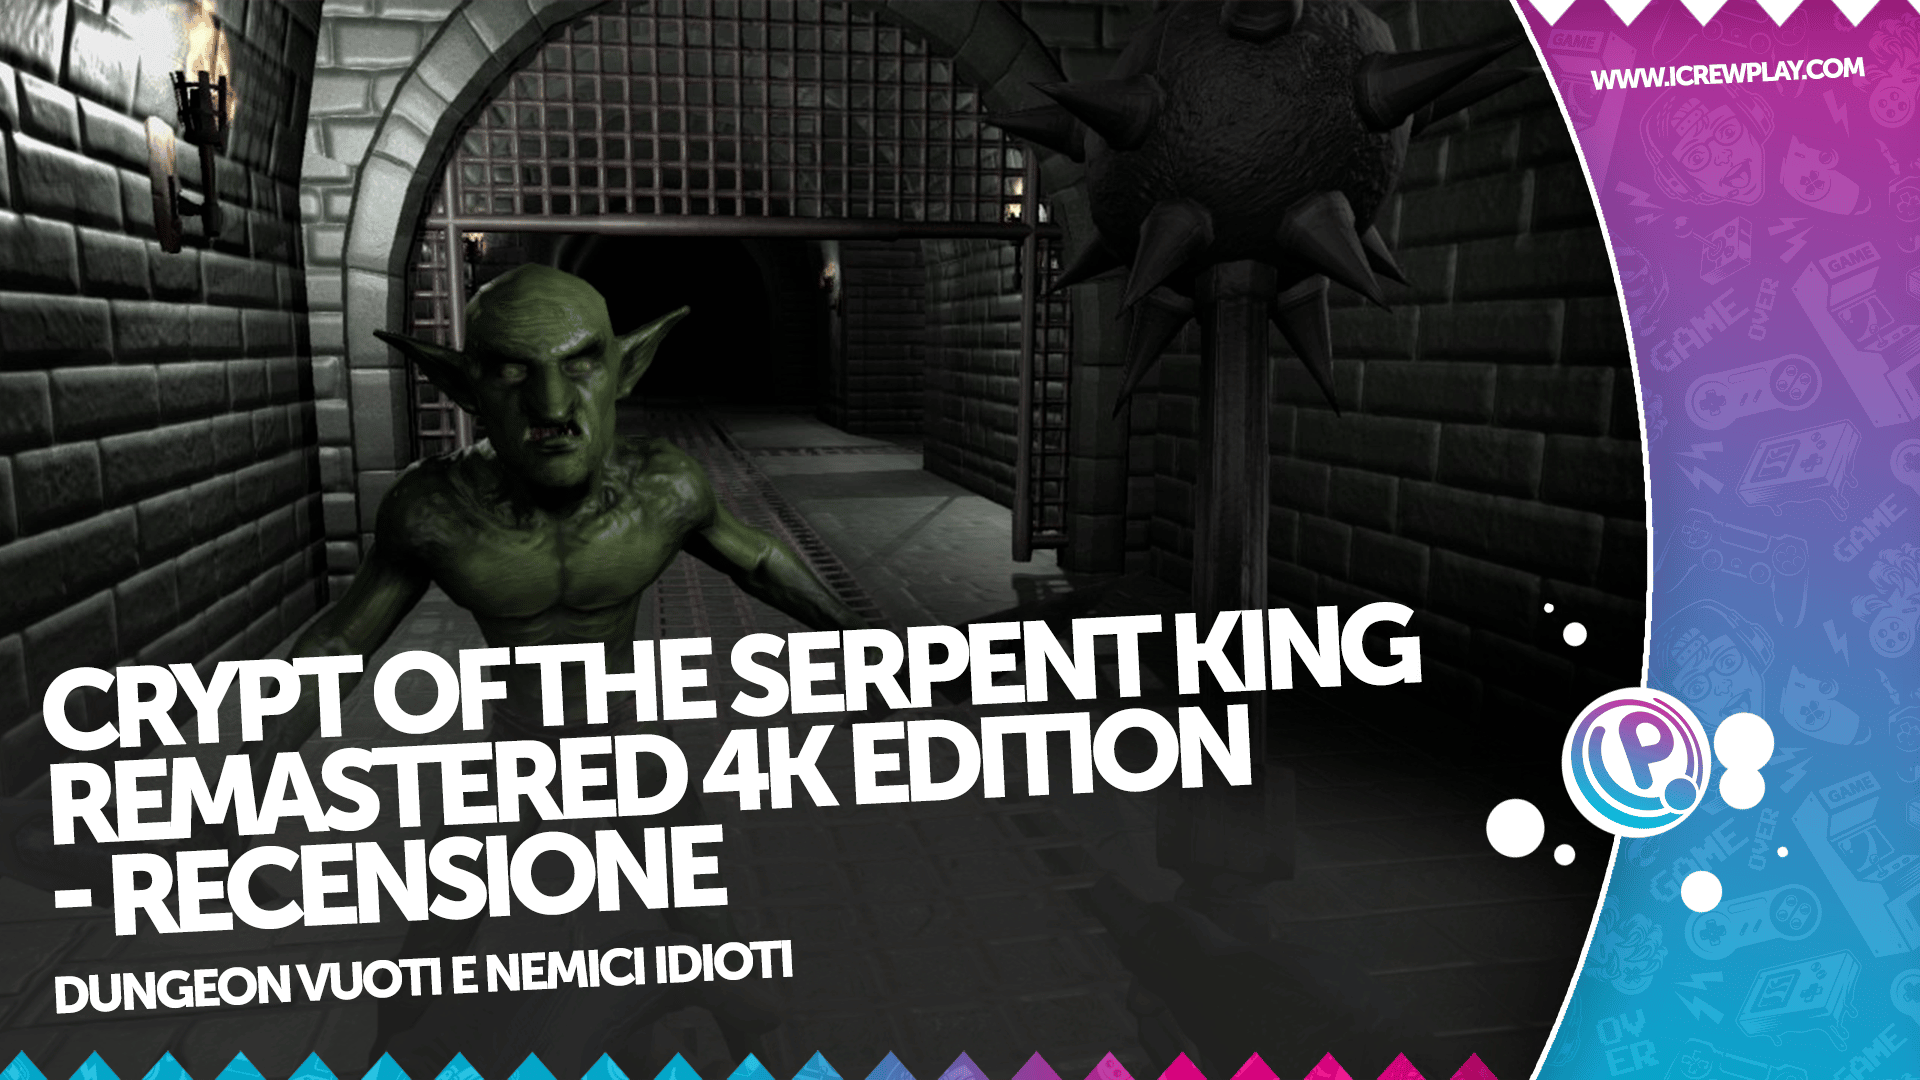 Crypt of the Serpent King Remastered 4K Edition - Recensione per PlayStation 5 6